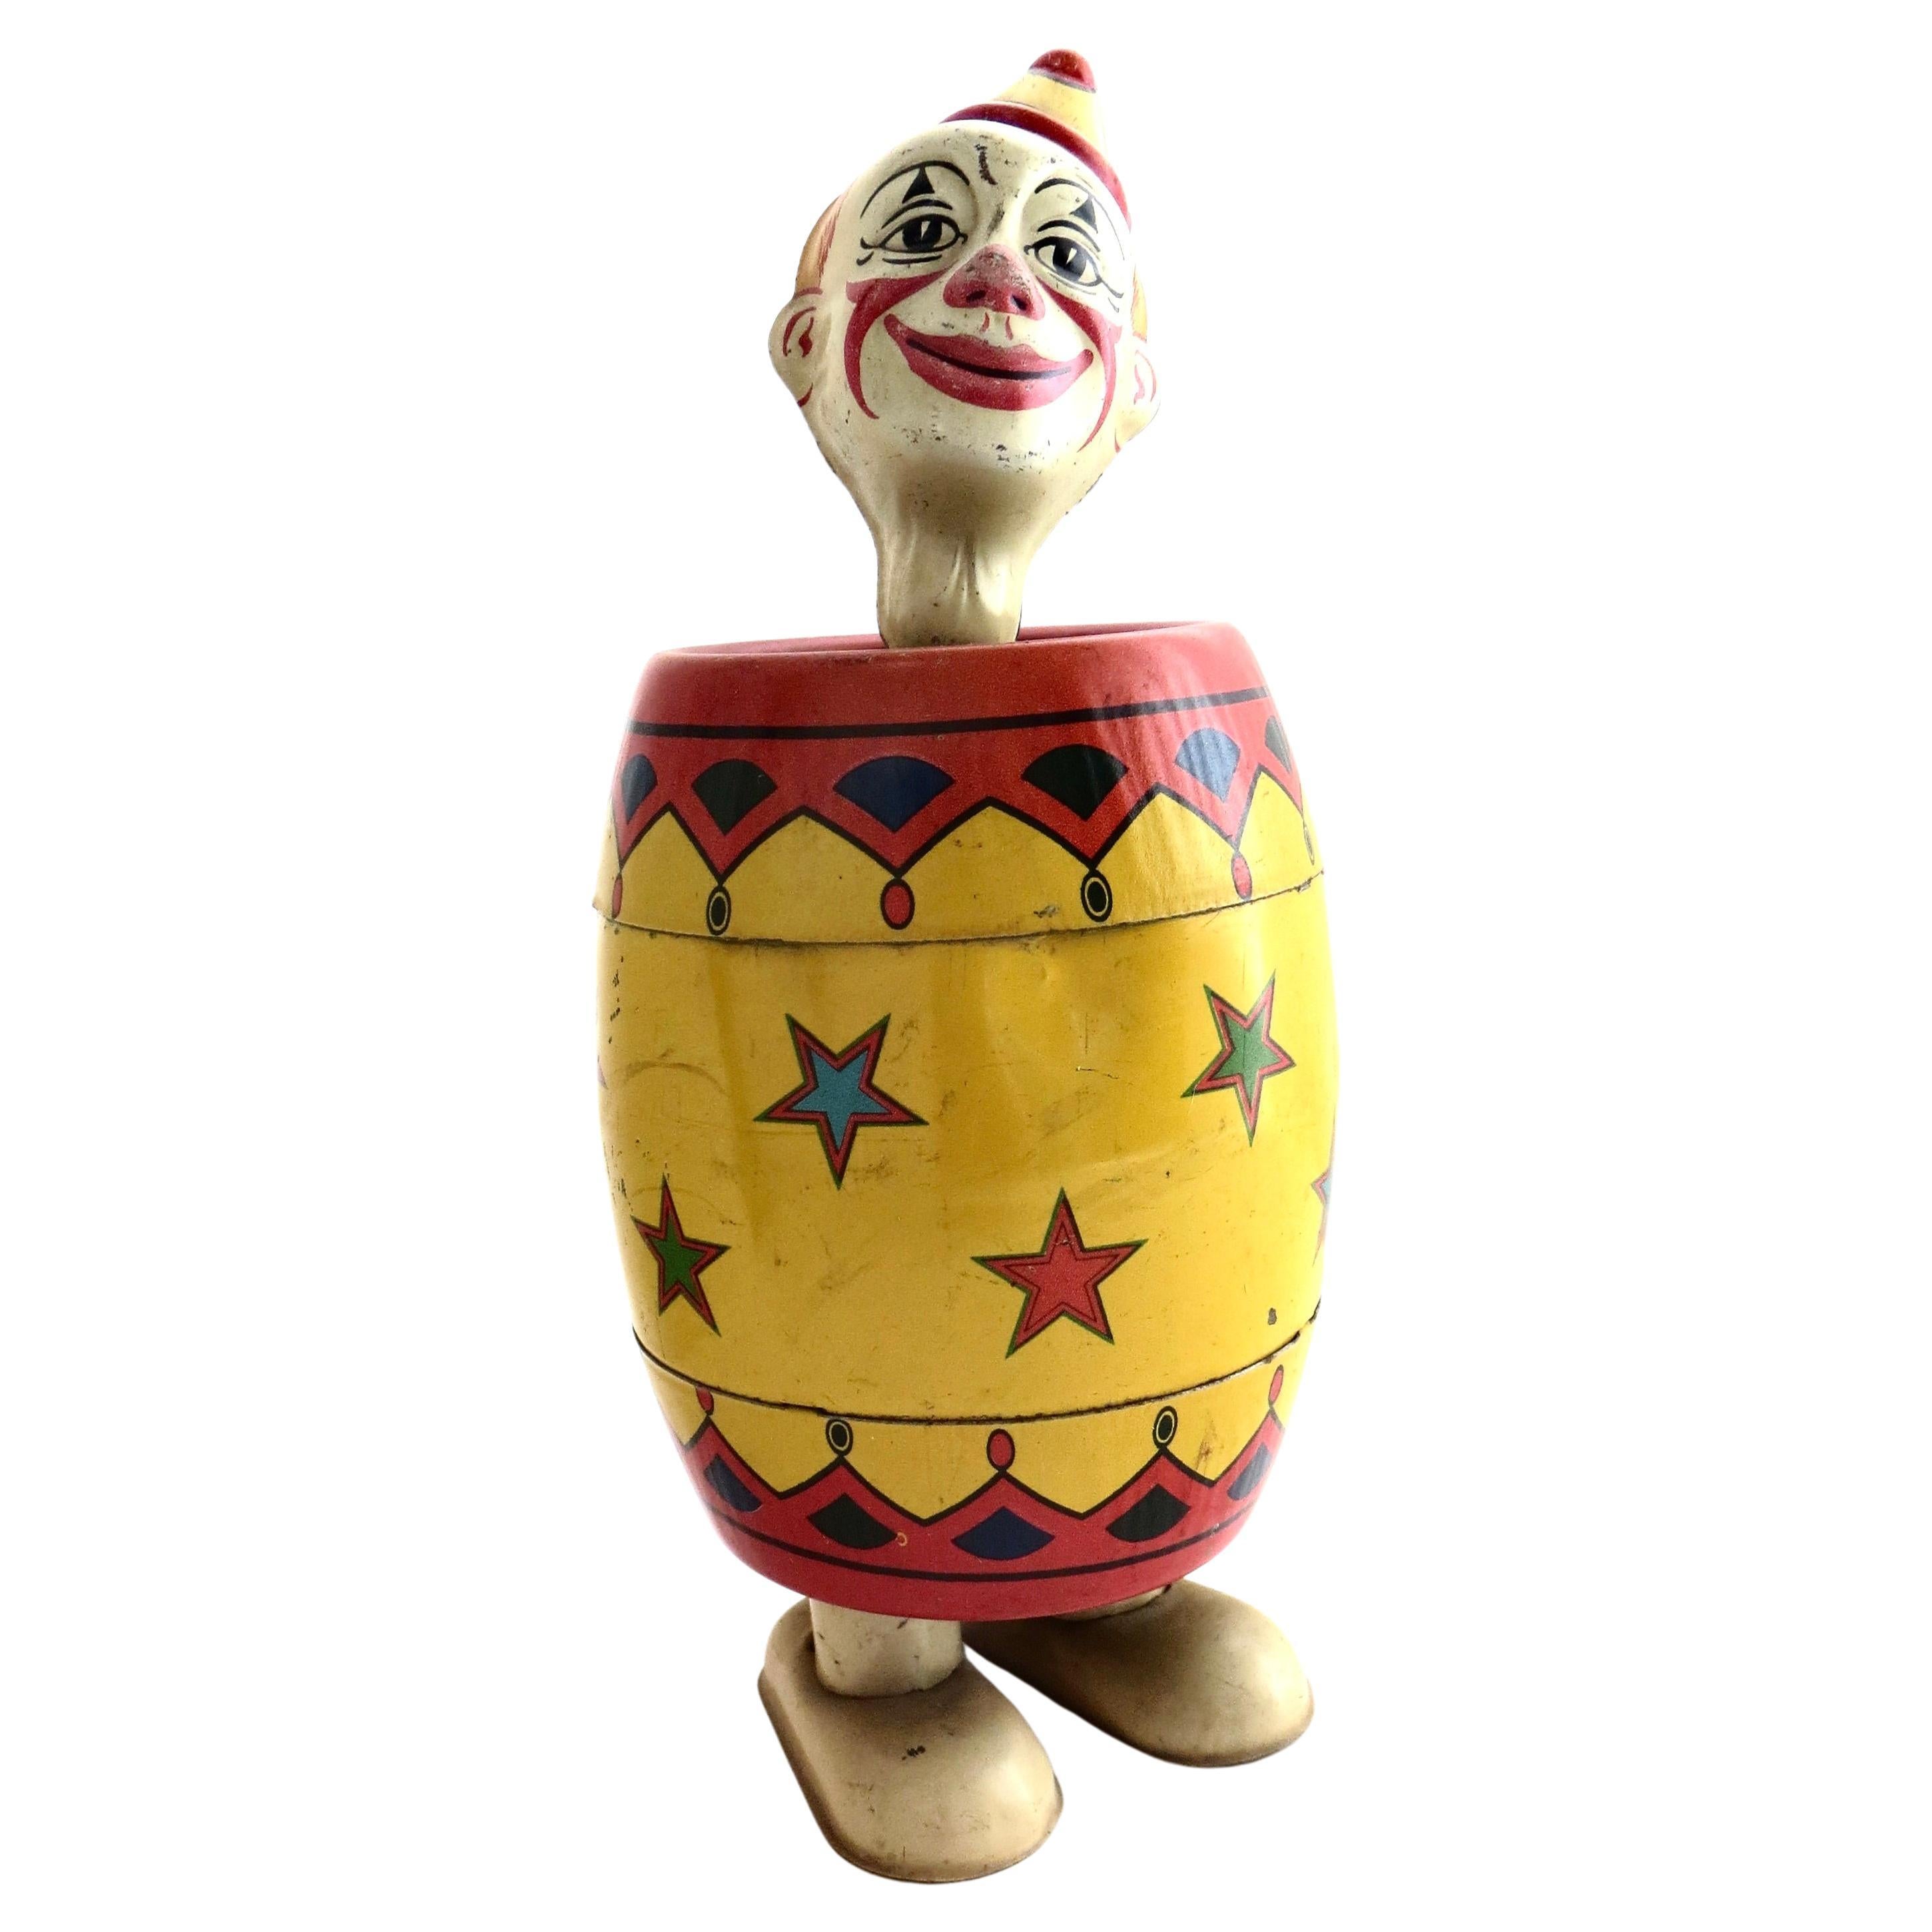 Vintage Tin Wind-up Toy "Clown in A Barrel" by J Chein & Co. American Circa 1935 For Sale